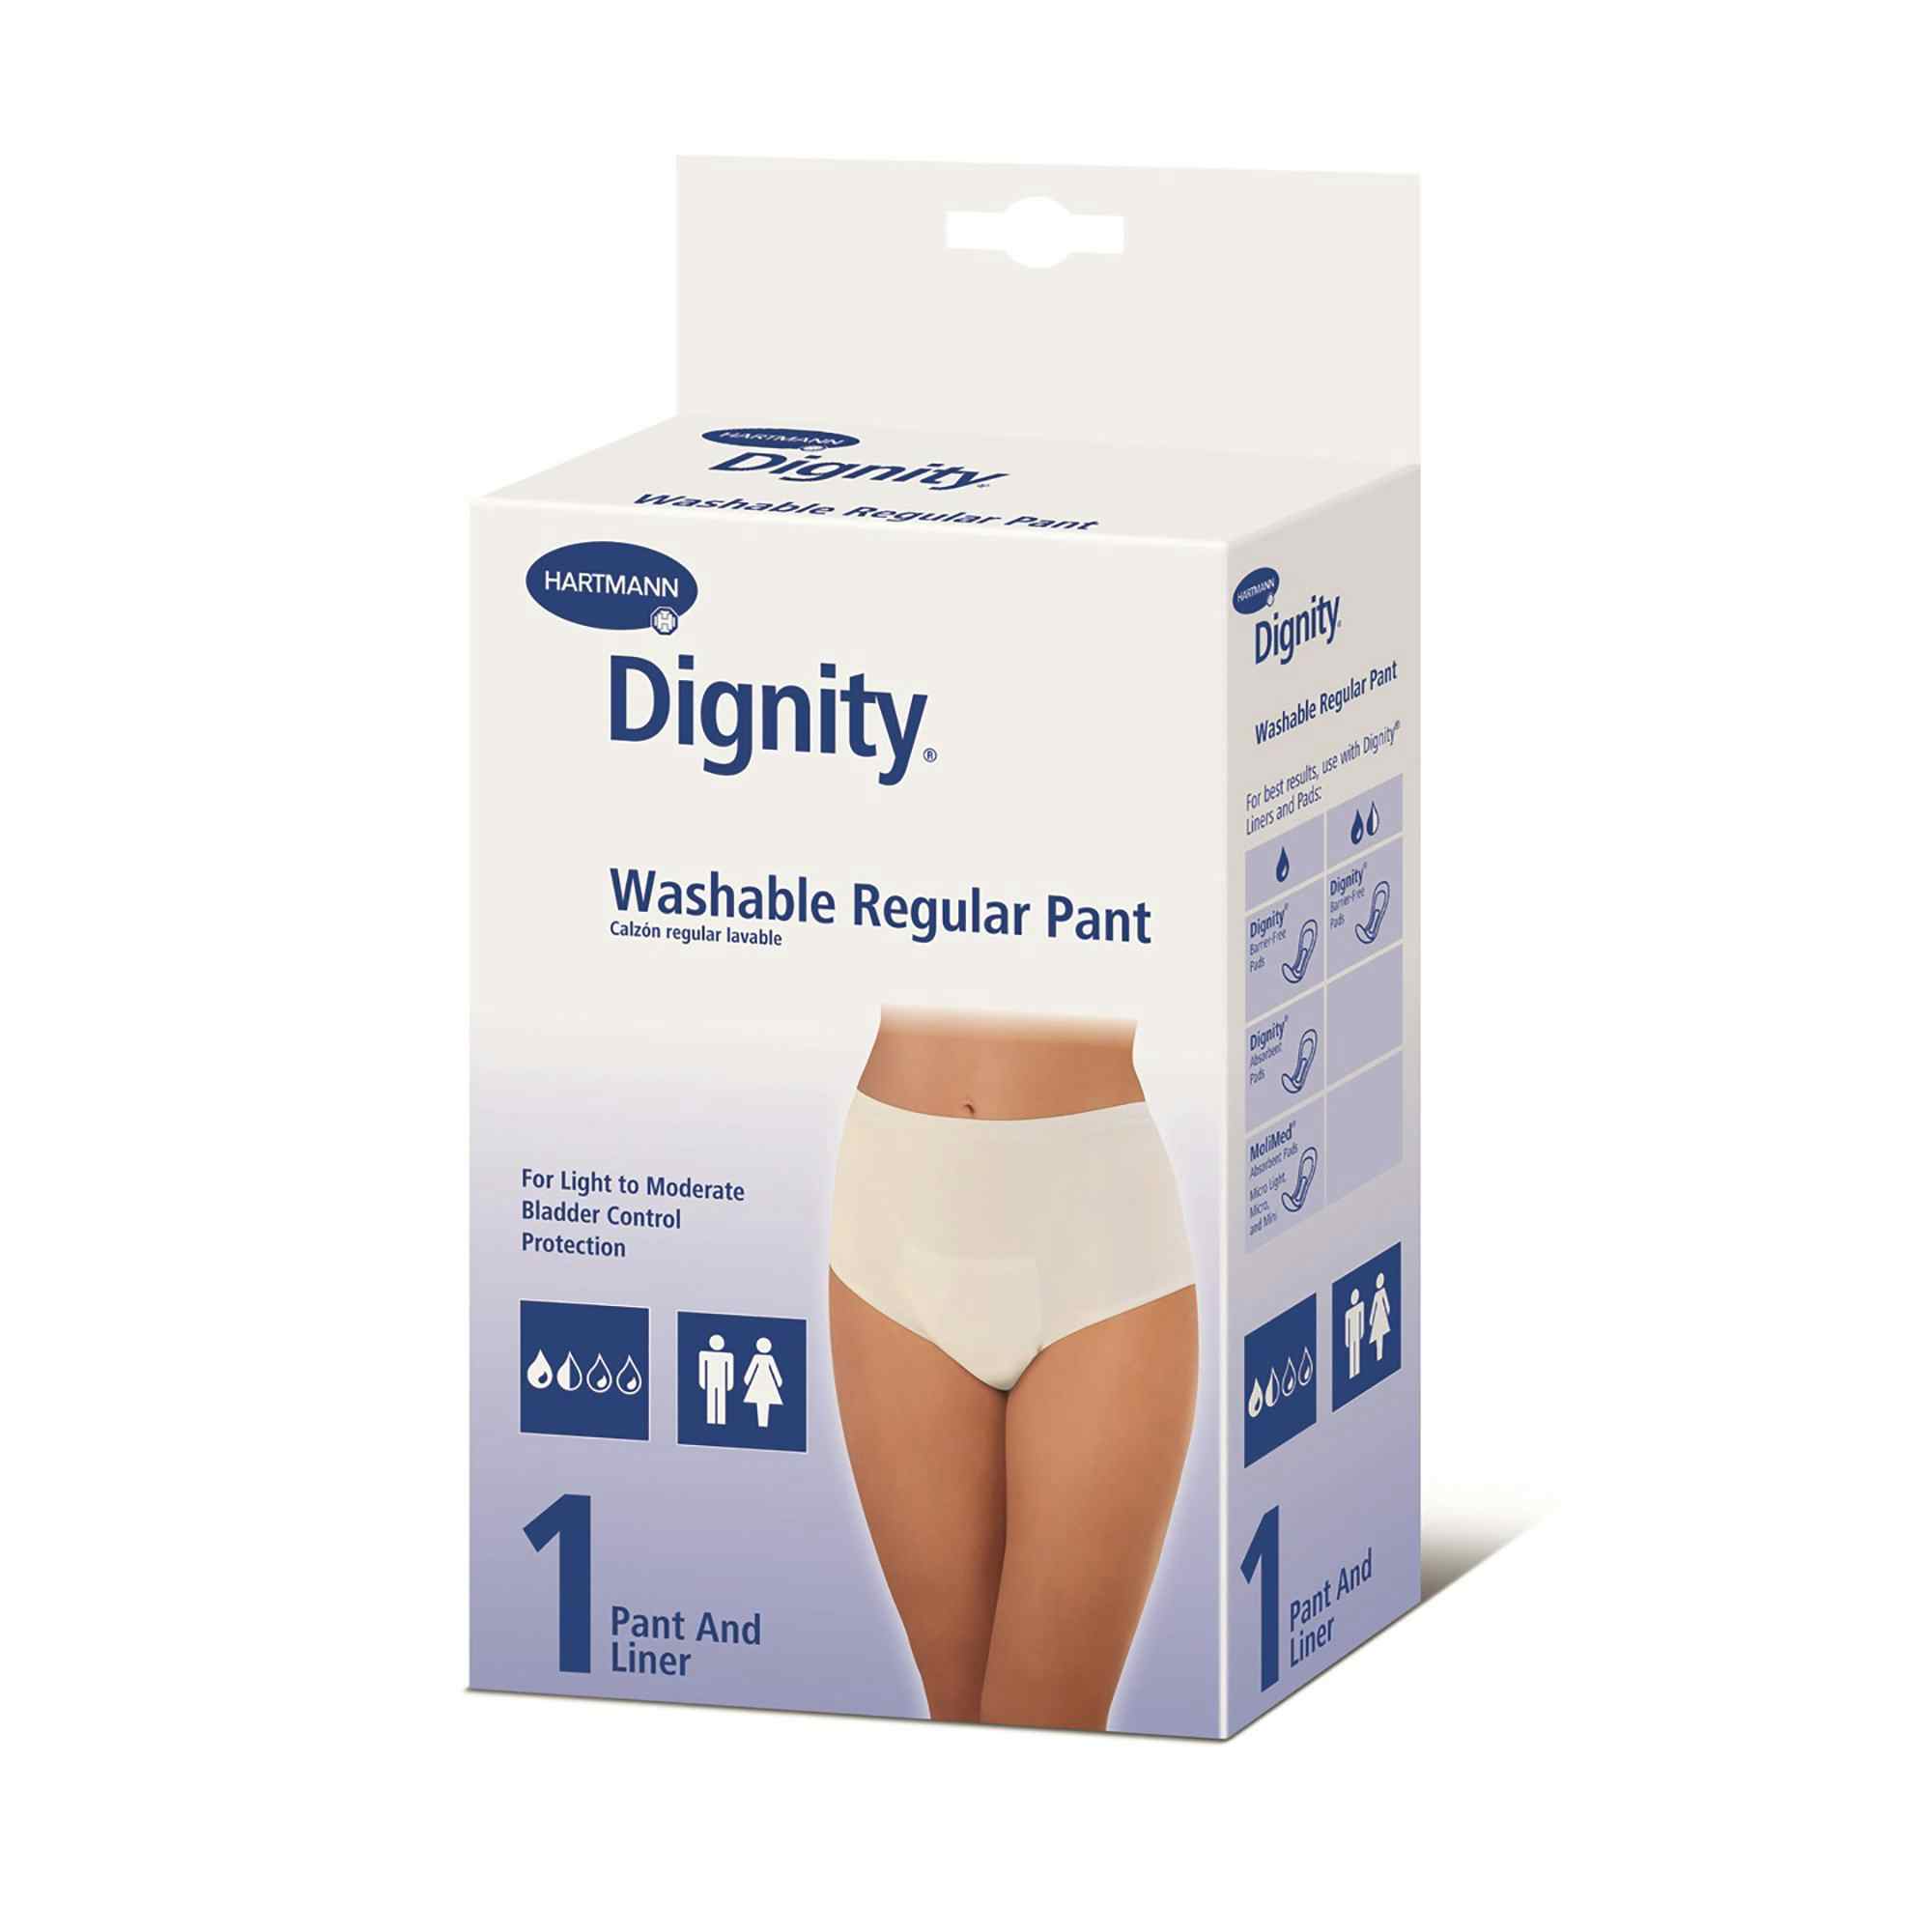 Dignity Unisex Pull On Reusable Protective Underwear with Liner, 16902, Small (30-35") - 1 Each